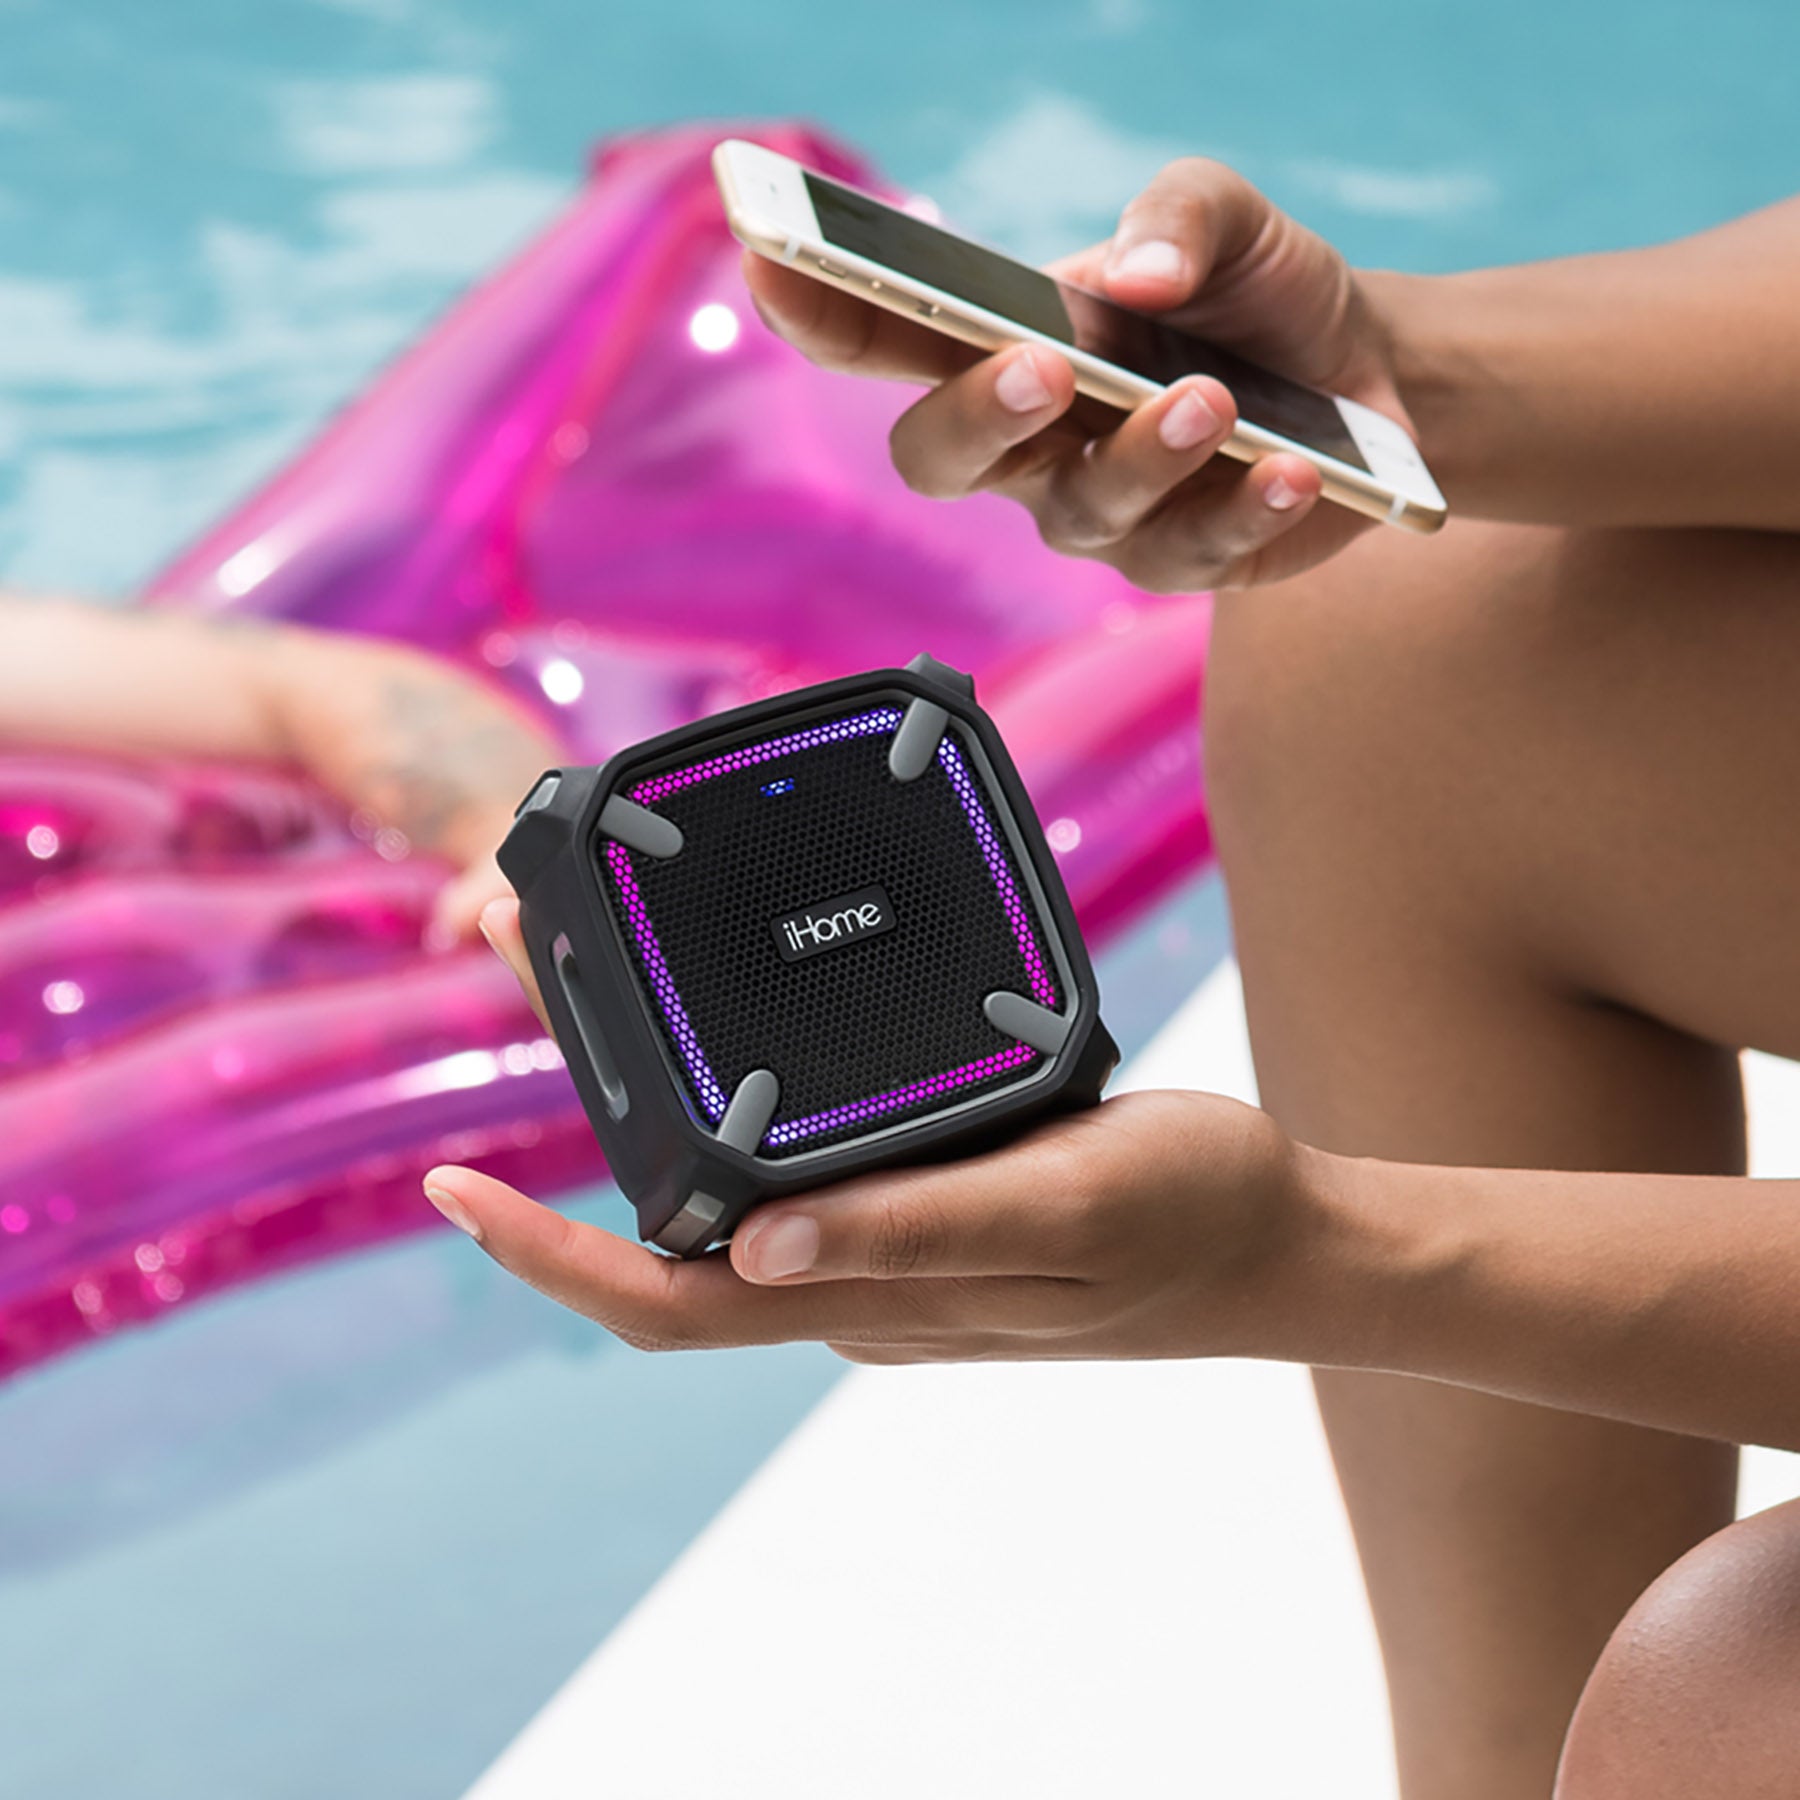 Waterproof Bluetooth Speaker with Color Changing Lights (iBT371BG)